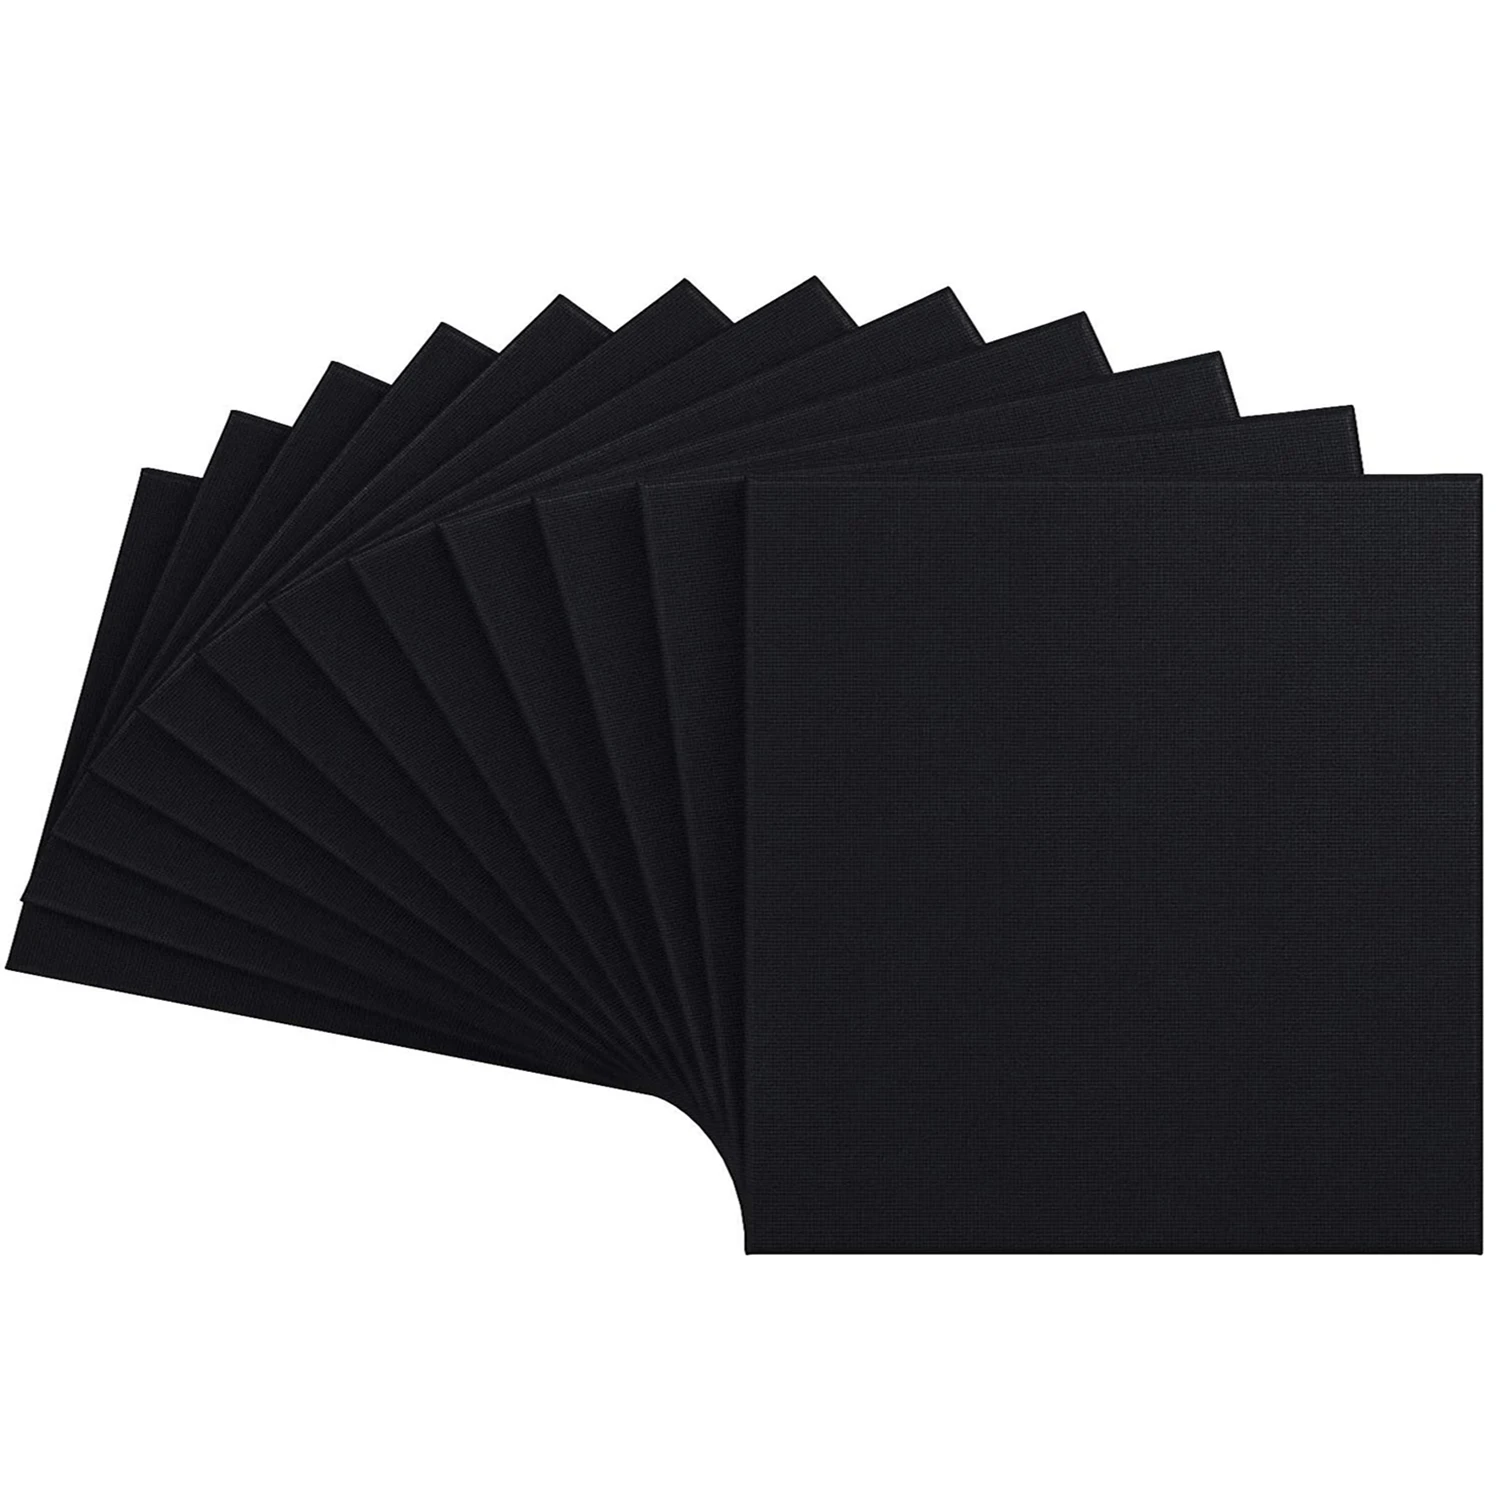 

Paint Canvases for Painting, Pack of 4, 16x16 Inches, Blank Black Canvas Bulk, 100% Cotton Stretched Canvas, 8 oz Gesso-Primed